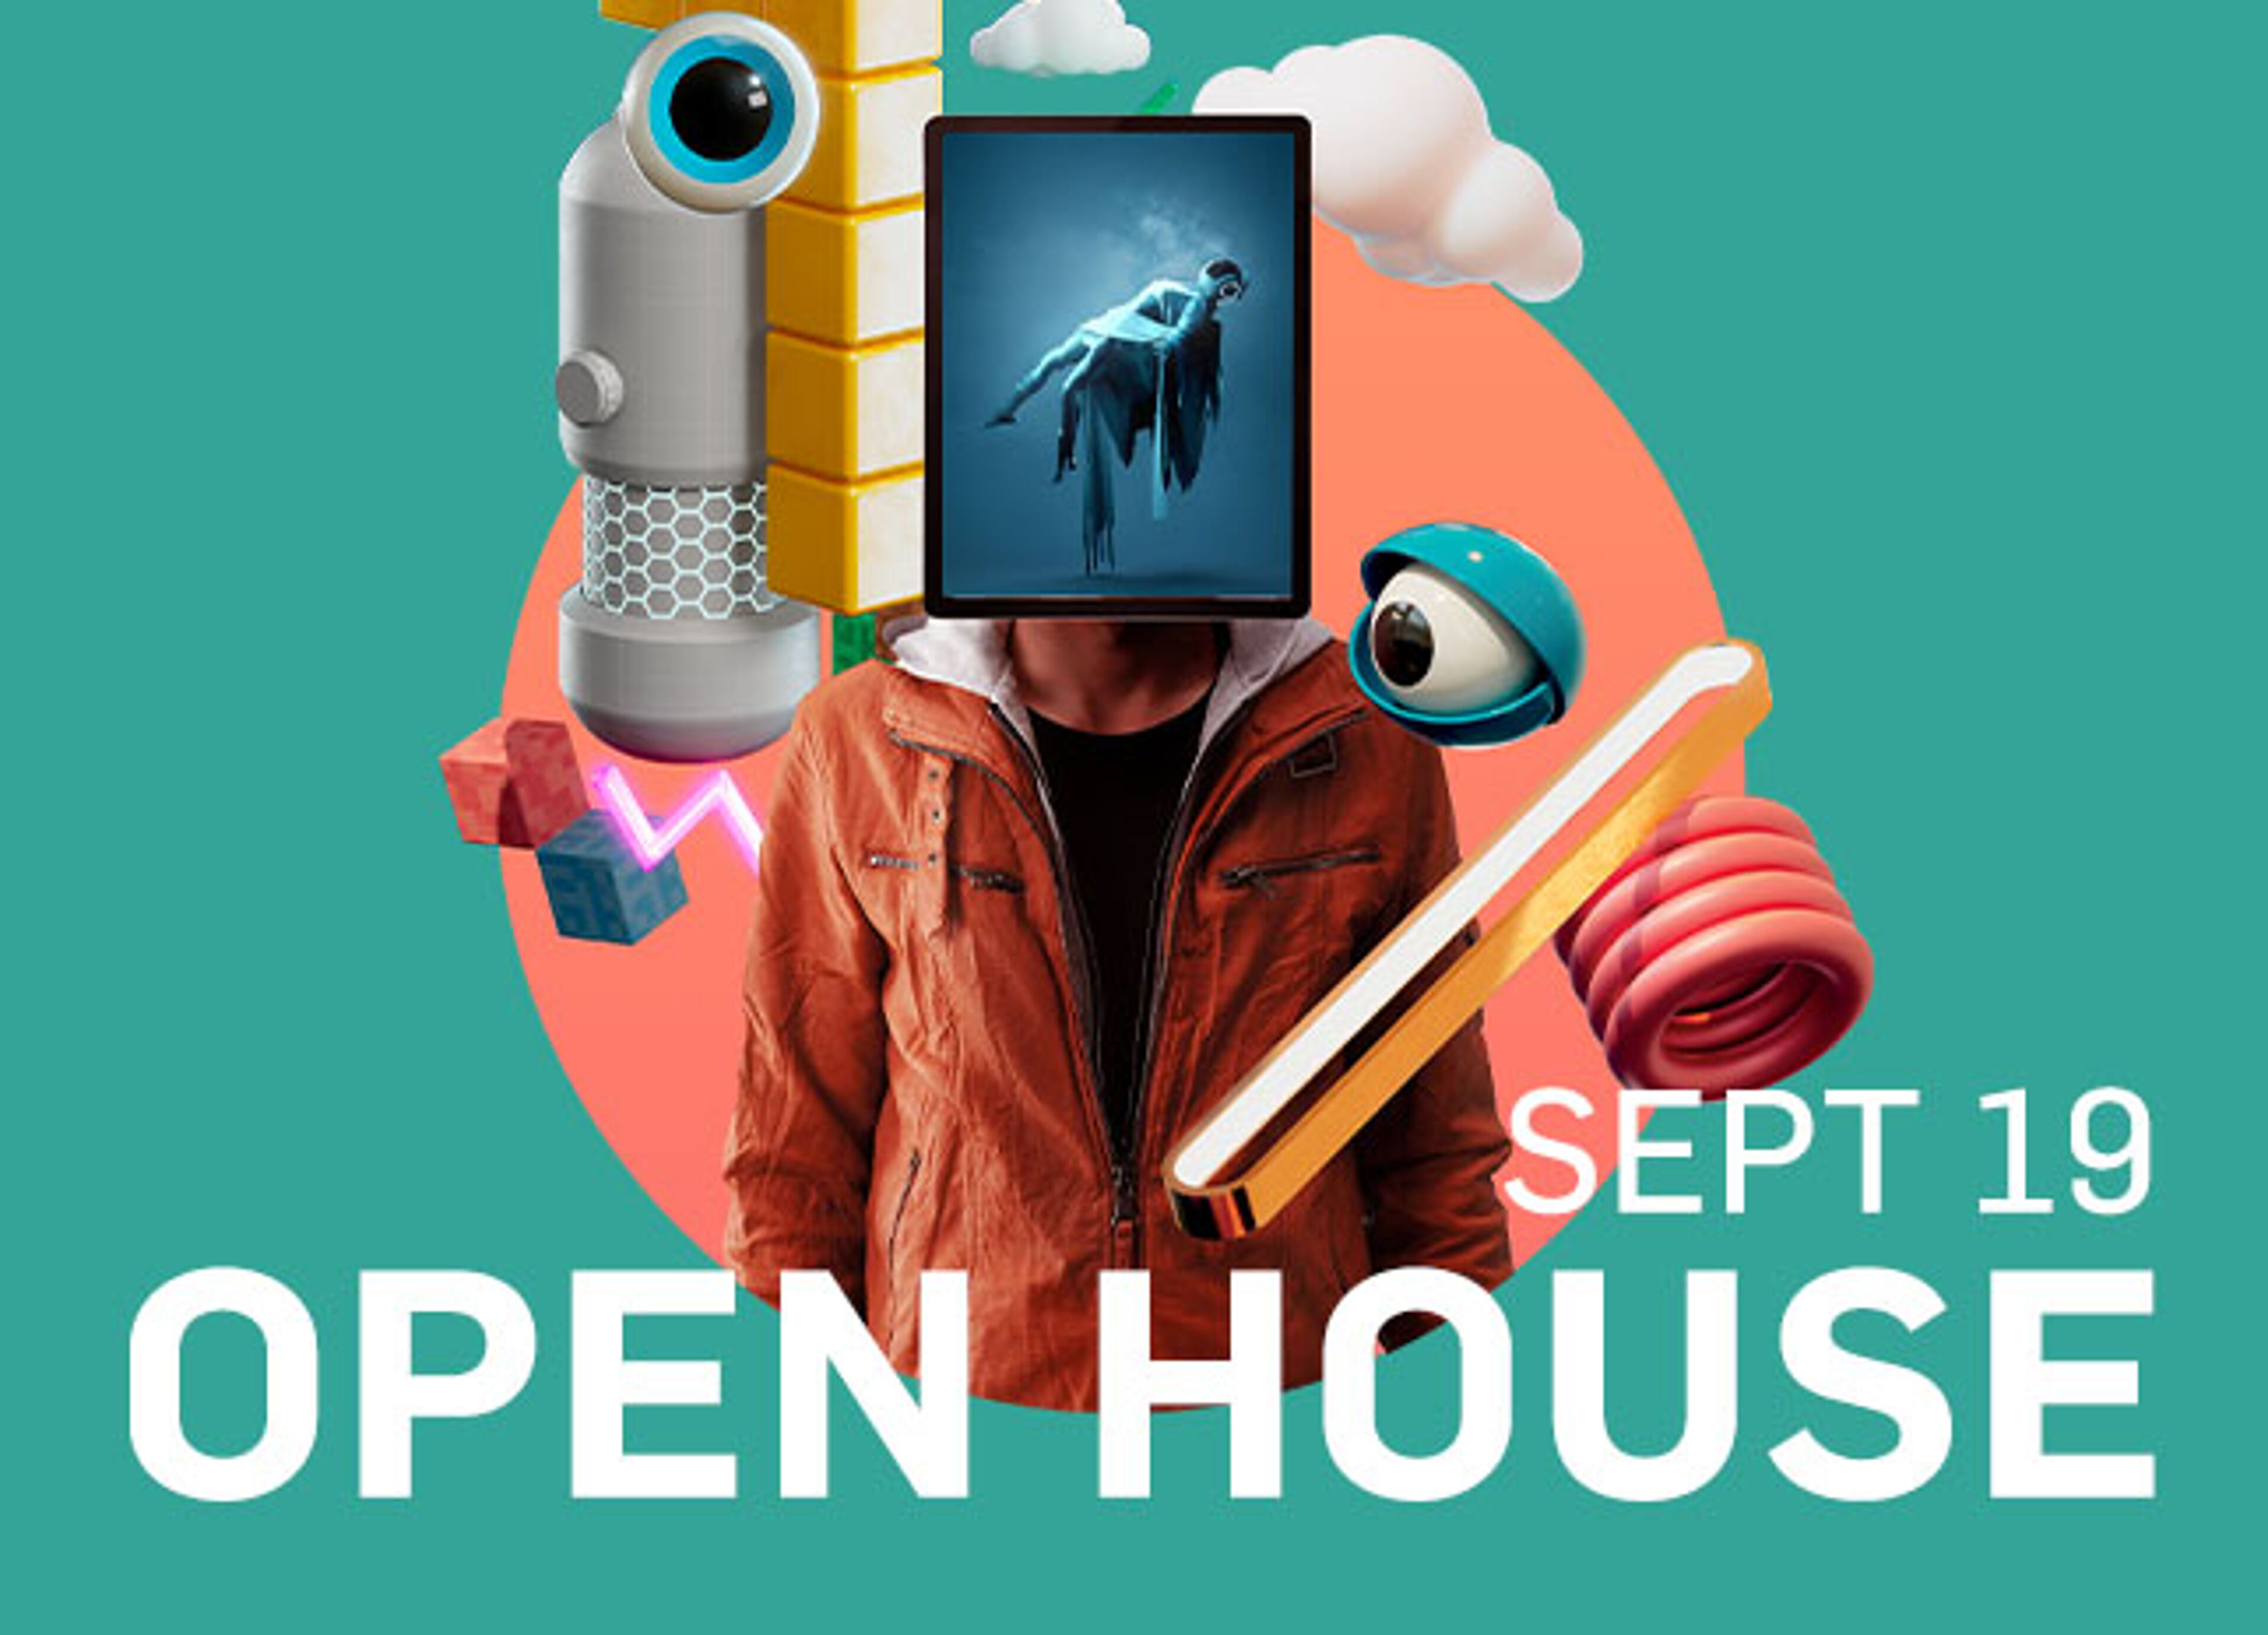 A vibrant poster for an Open House event on September 19 featuring an abstract design with a figure obscured by a digital screen, surrounded by whimsical elements like a telescope, a pencil, and geometric shapes.